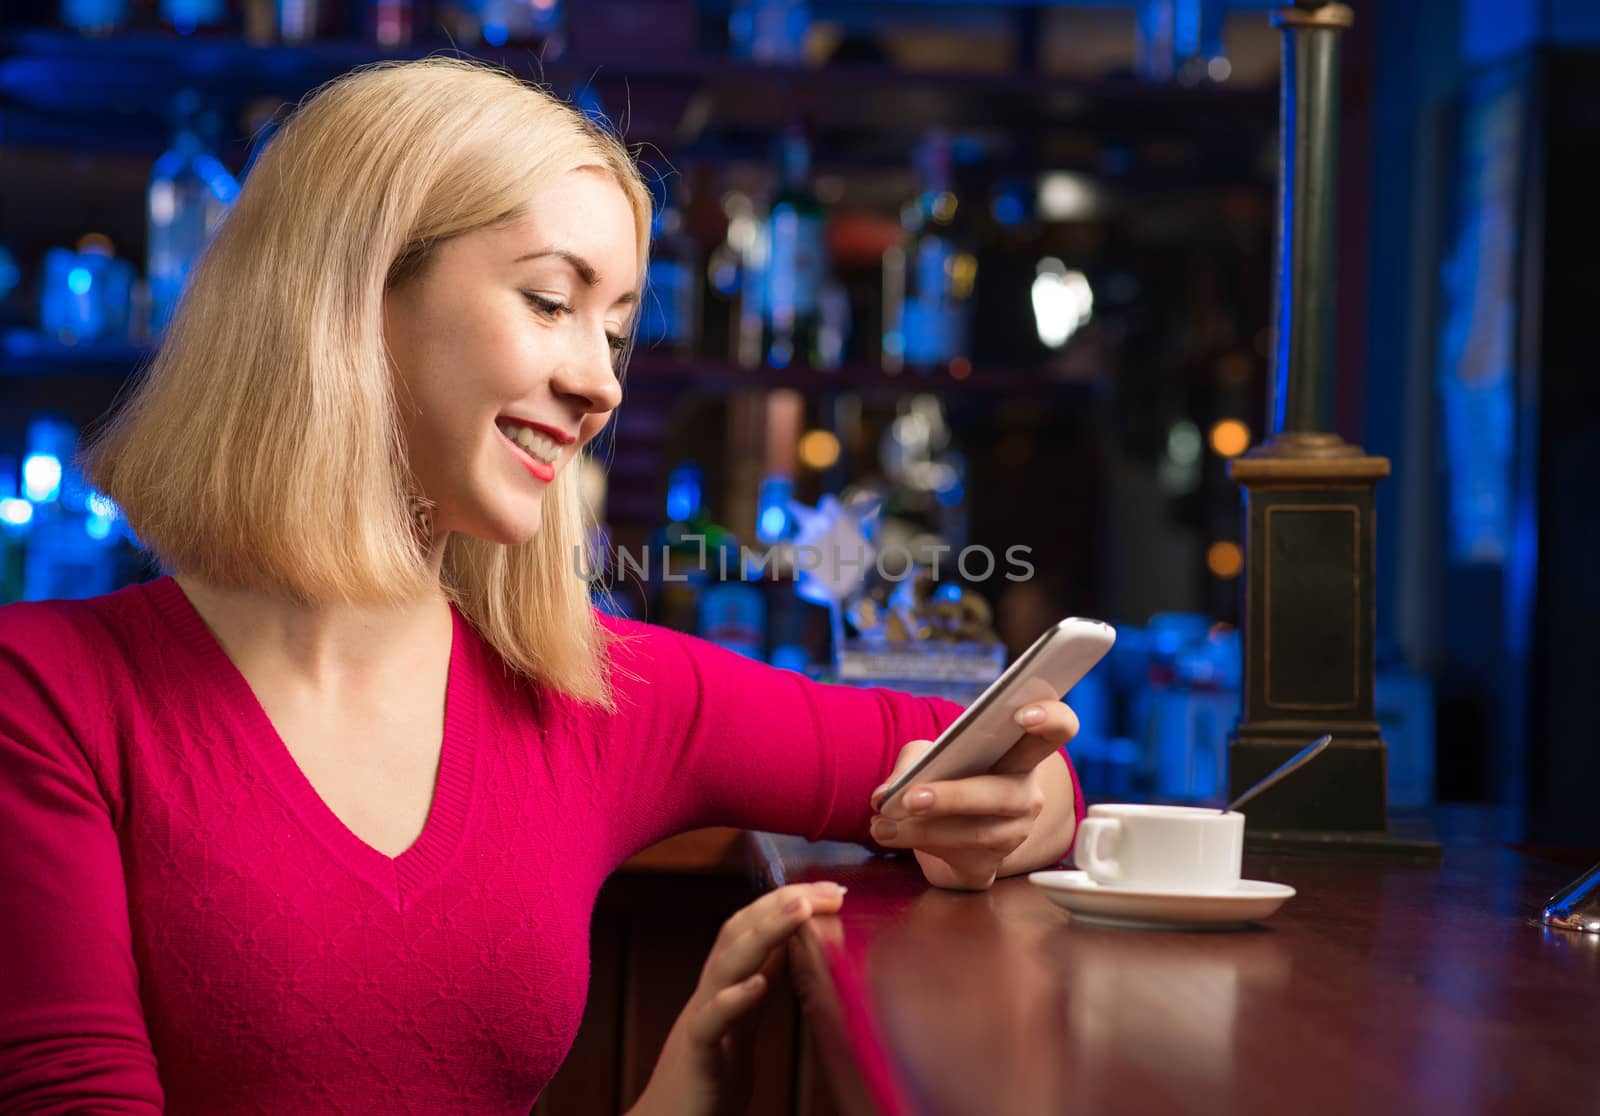 portrait of a young woman in a bar with a cell phone and a cup of coffee